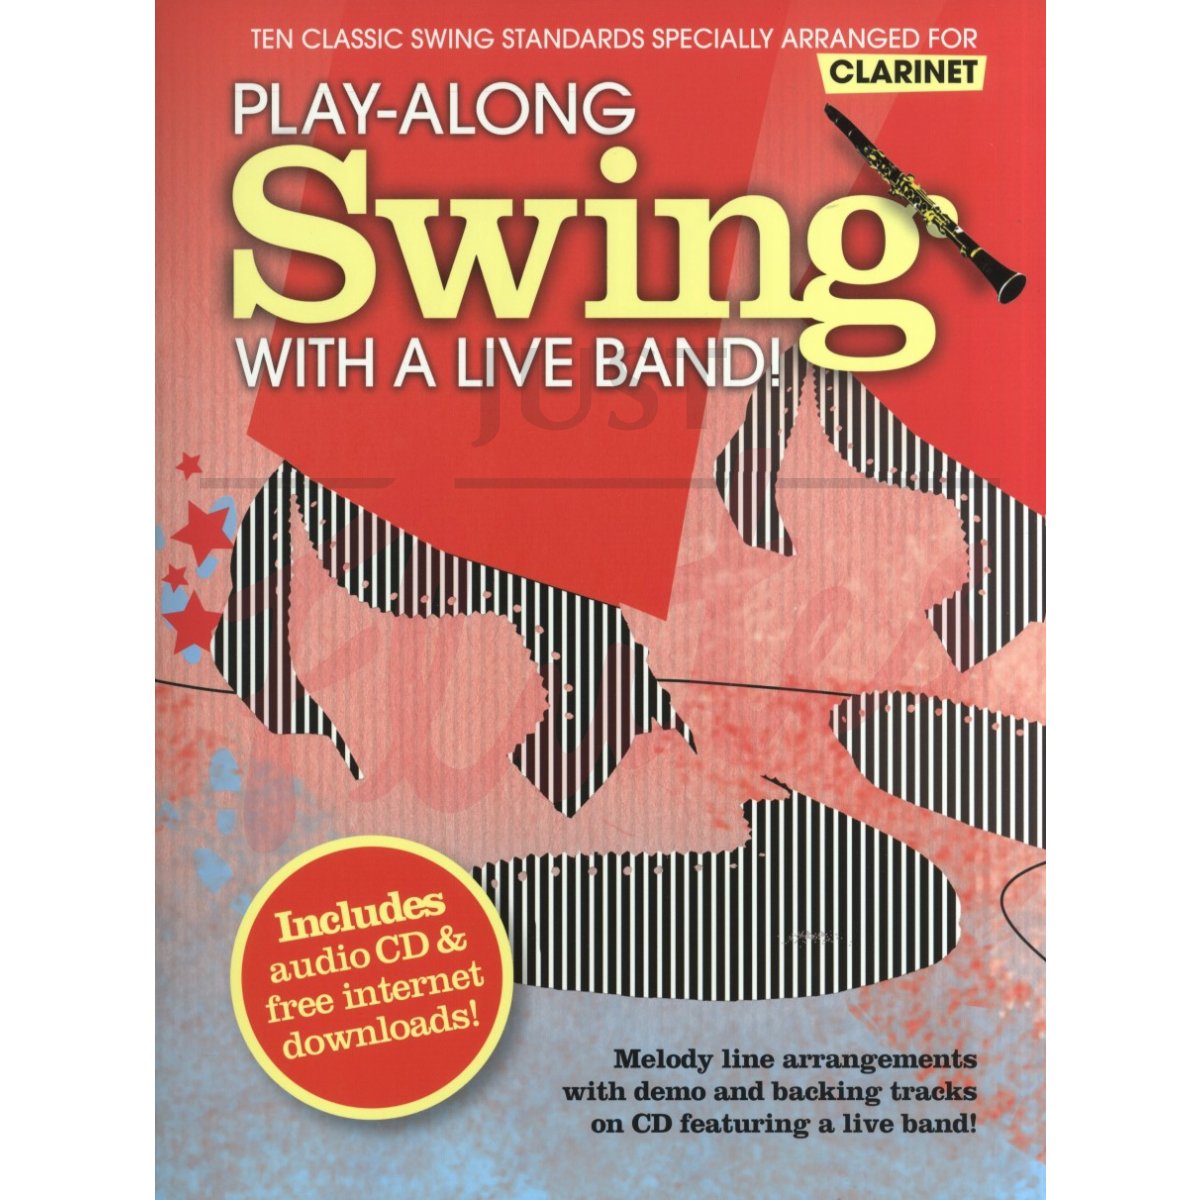 Play-Along Swing With a Live Band! [Clarinet]